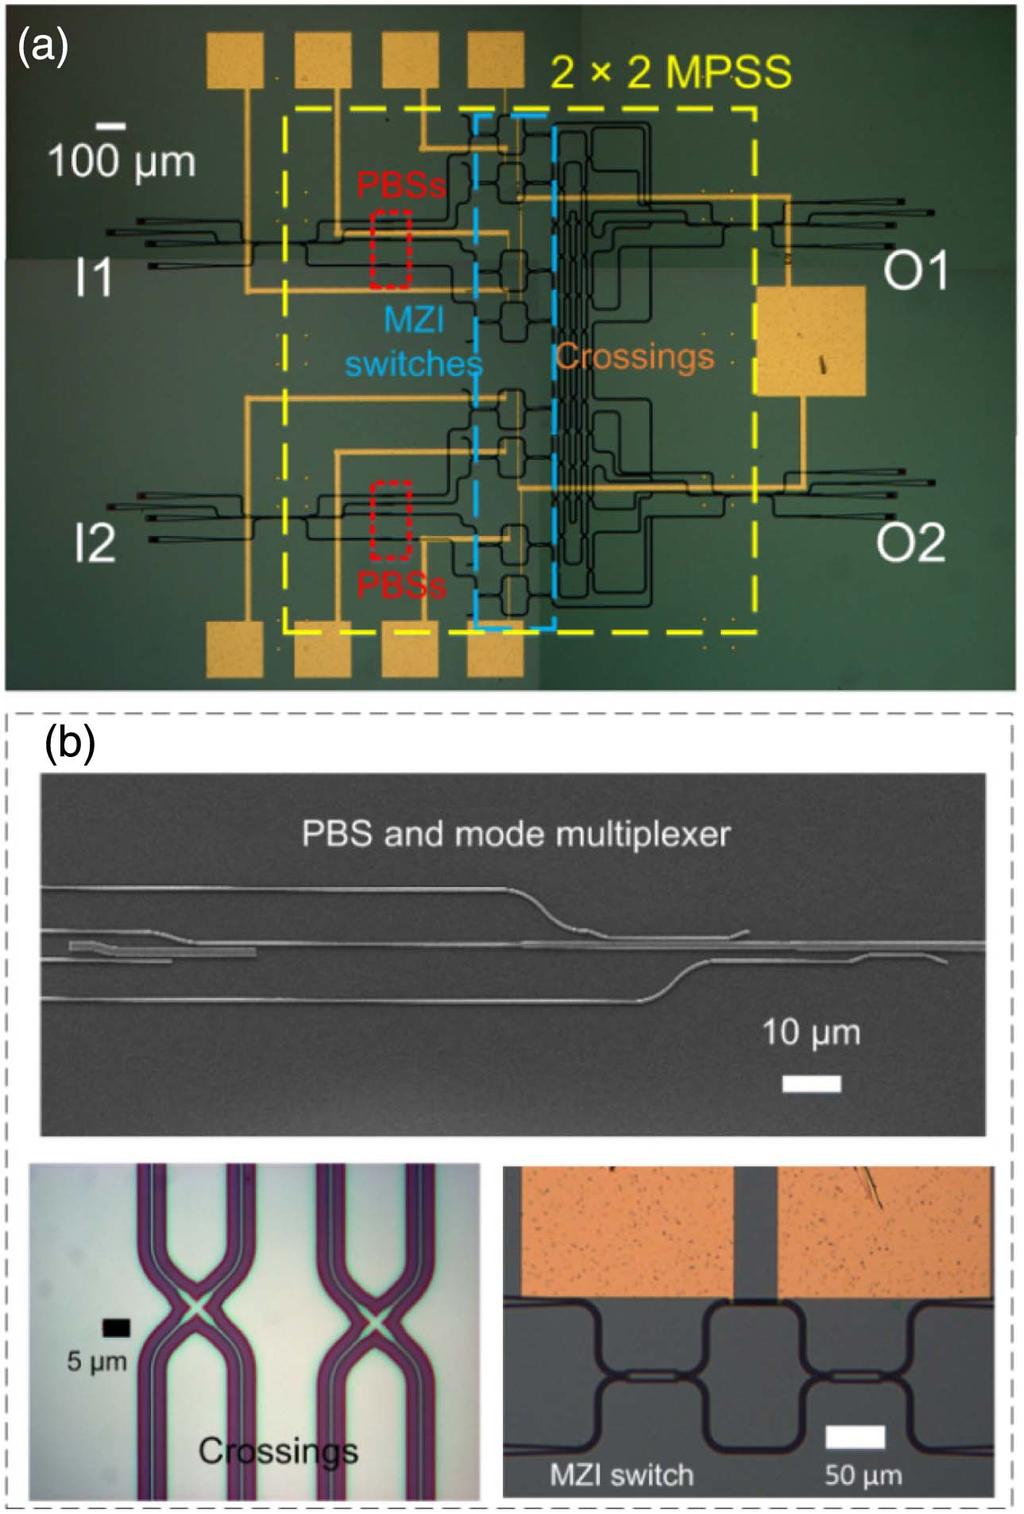 Research Article Vol. 5, No. 5 / October 2017 / Photonics Research 523 Table 1. Measured Performance of Building Blocks Building Block Insertion Loss (db) Crosstalk (db) PBS for TE 0 0.